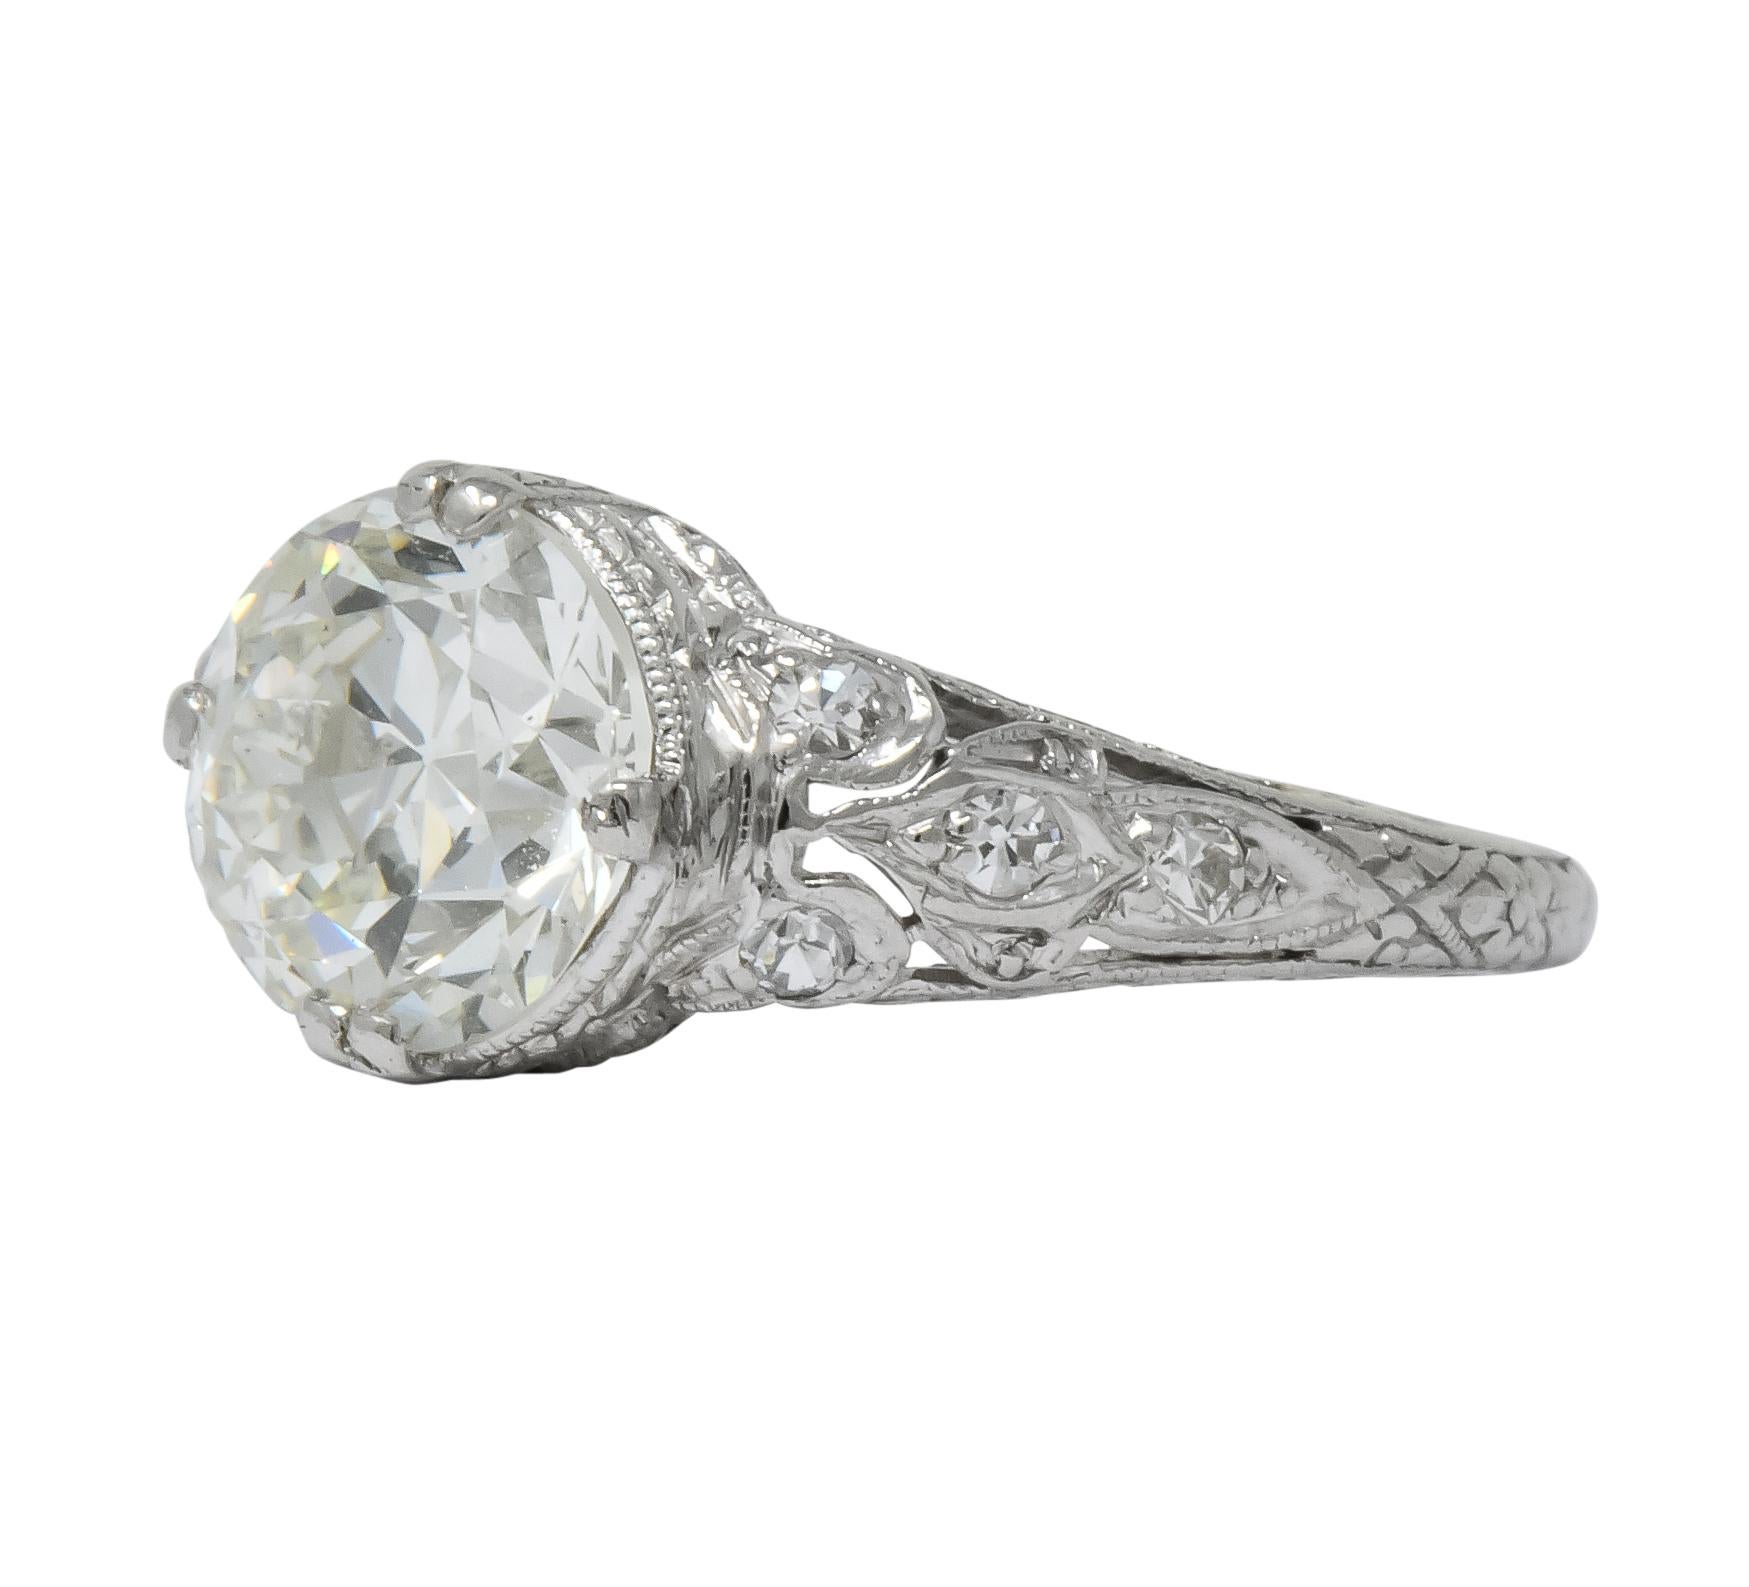 Centering an old European  circular brilliant cut diamond weighing 2.01 carats, J color and SI1 clarity

Accented by single cut diamonds weighing approximately 0.12 carat, eye-clean and white

Engraved foliate motif gallery and shank with millegrain